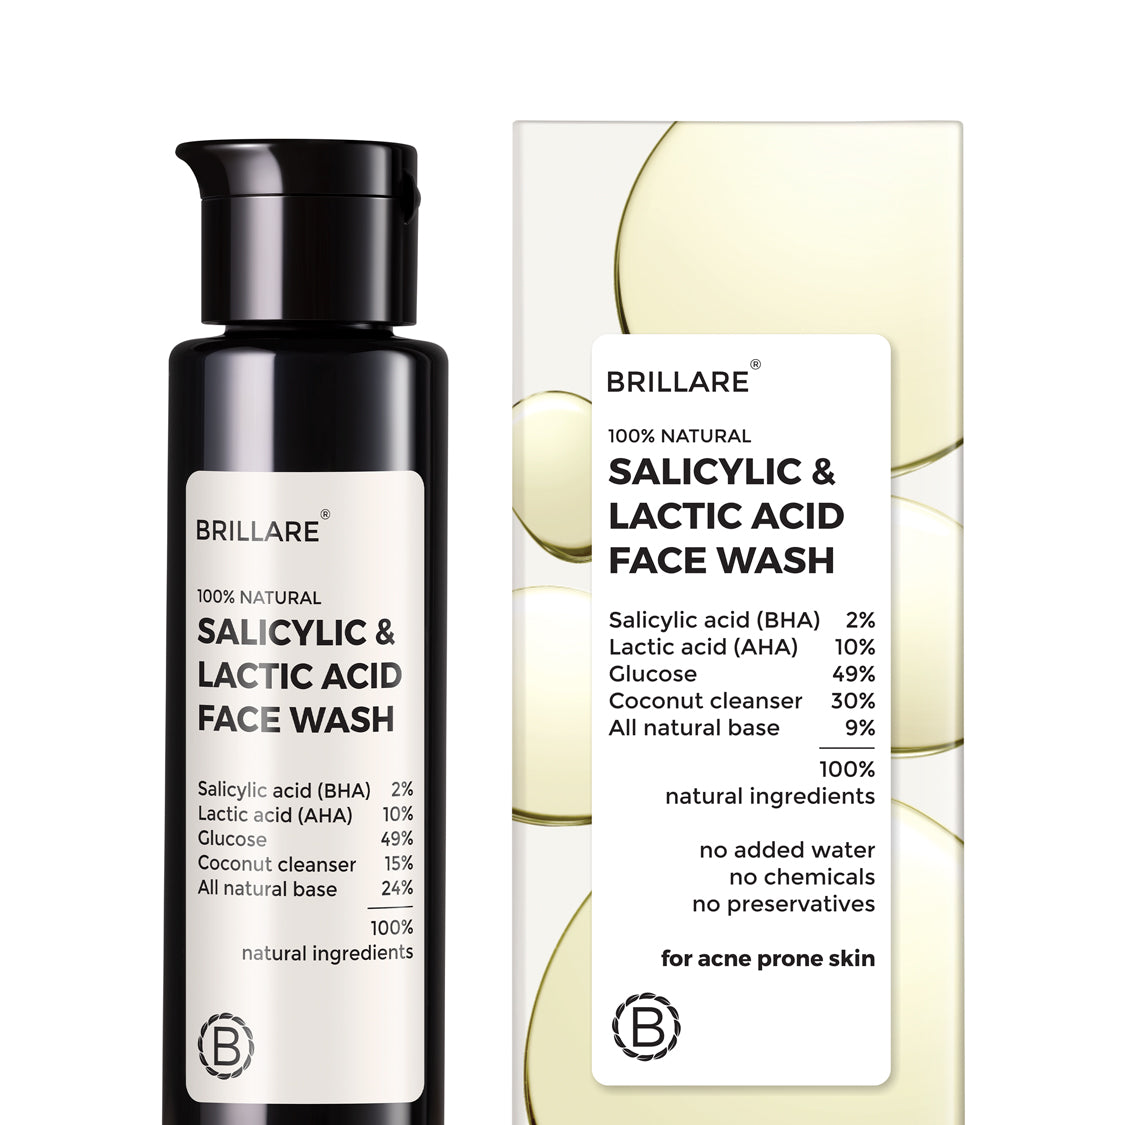 2% Salicylic and 10% Lactic Acid Face Wash for acne prone skin